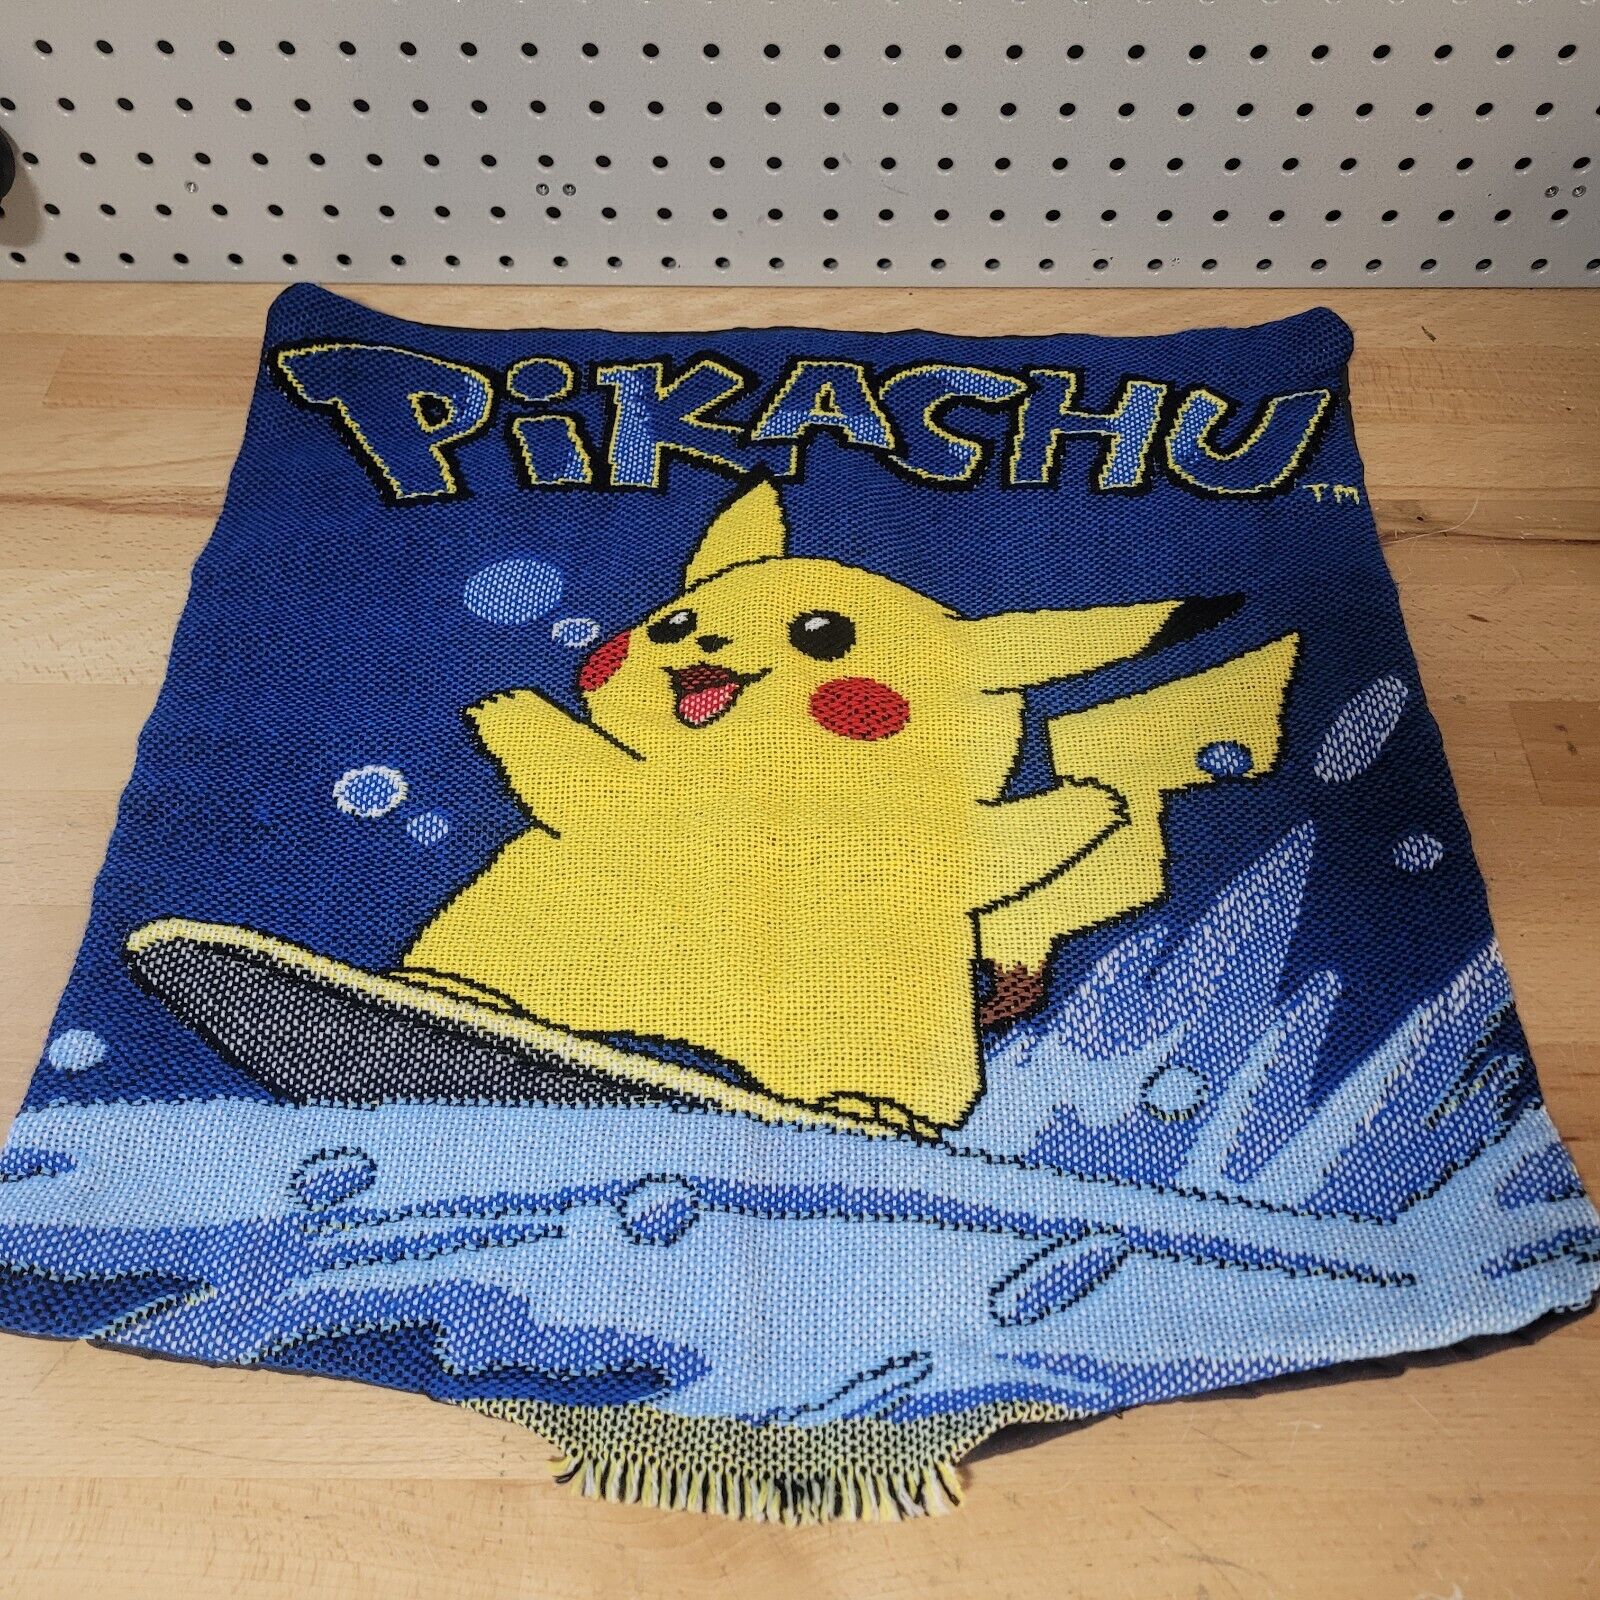 Vintage Pokemon Pikachu Pillow Case *Unstuffed New* 19X18 Rare Possibly Homemade